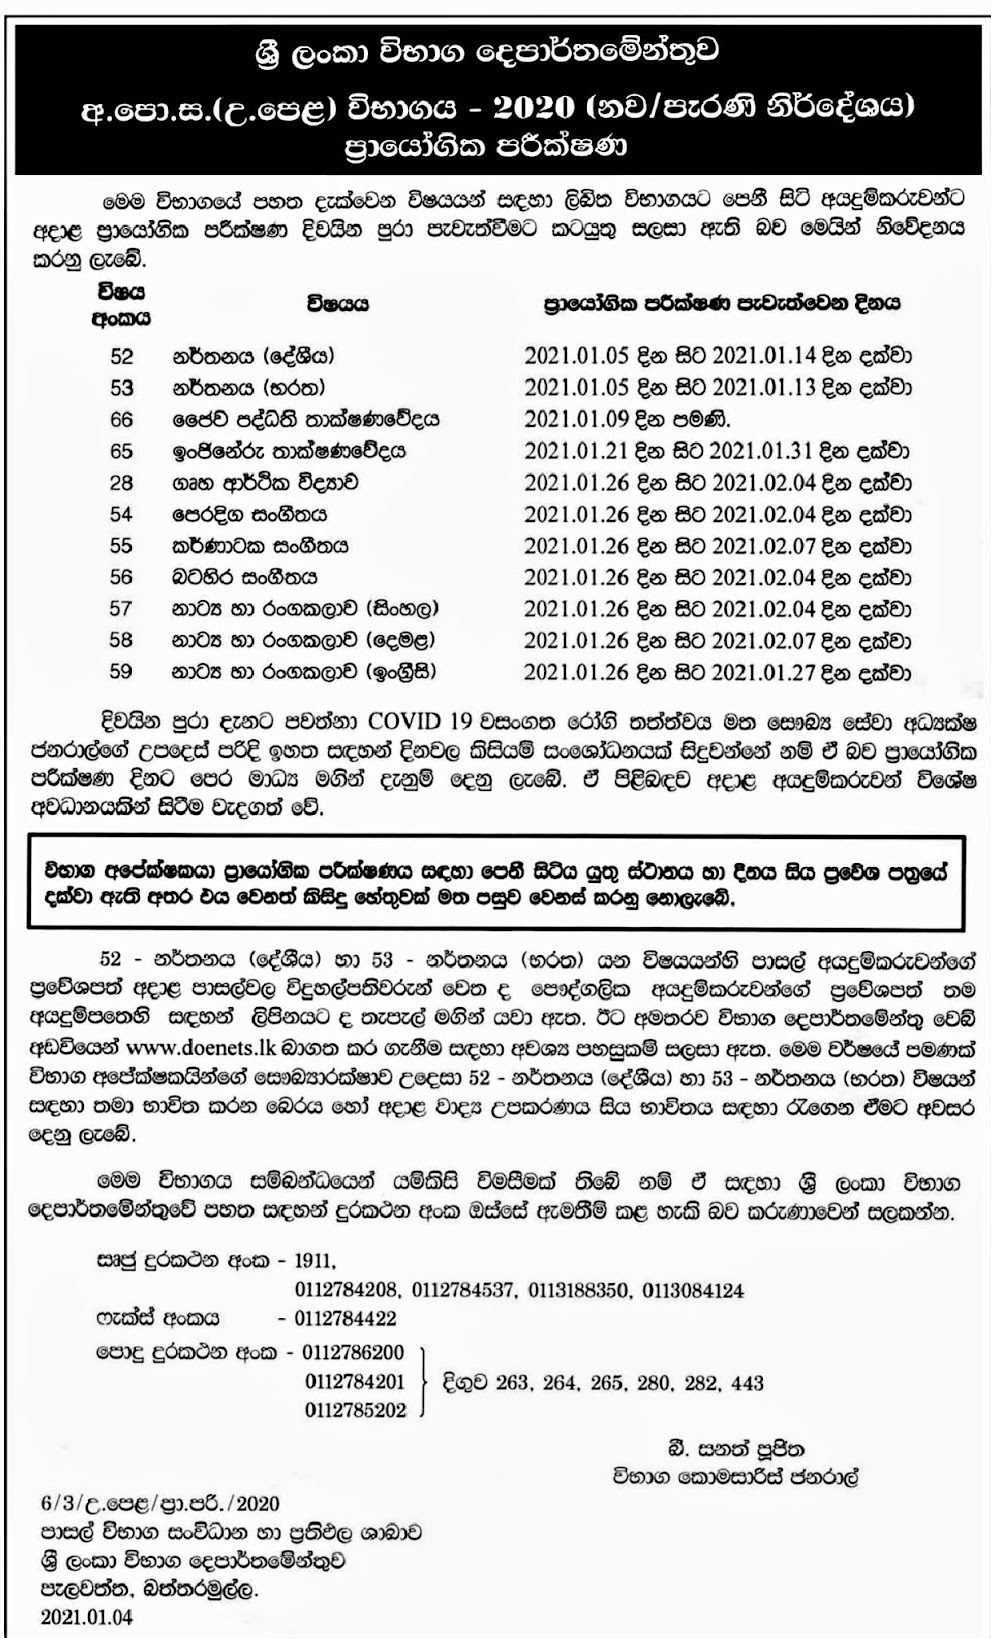 GCE A/L Practical Exams 2020 (Exam Dates and Admission Card)